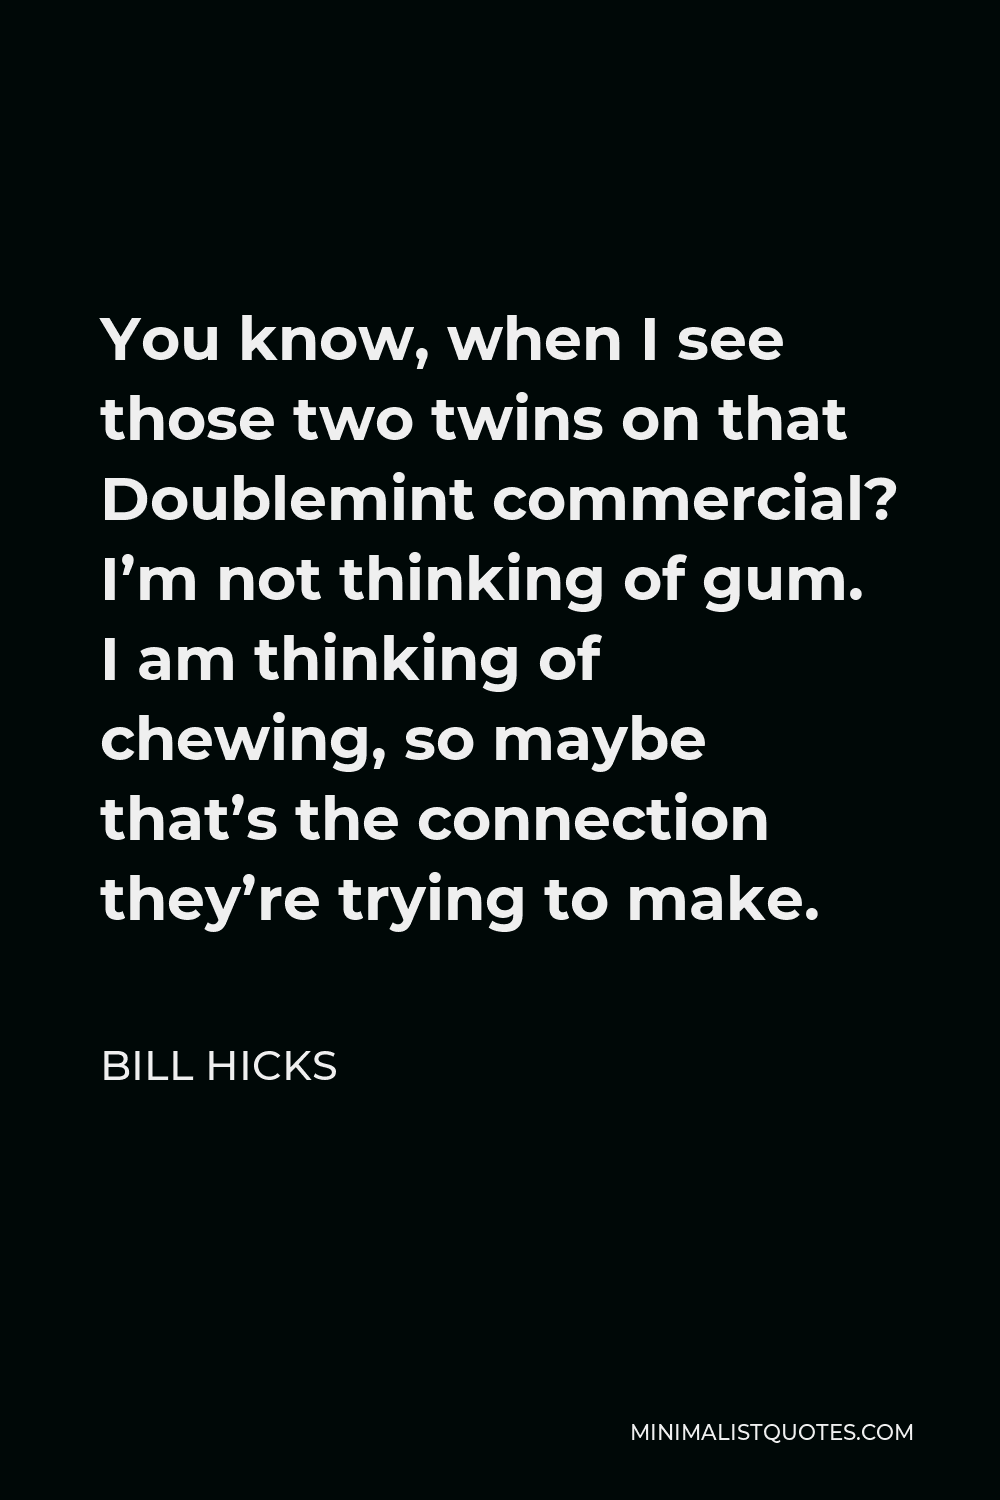 Bill Hicks Quote - You know, when I see those two twins on that Doublemint commercial? I’m not thinking of gum. I am thinking of chewing, so maybe that’s the connection they’re trying to make.